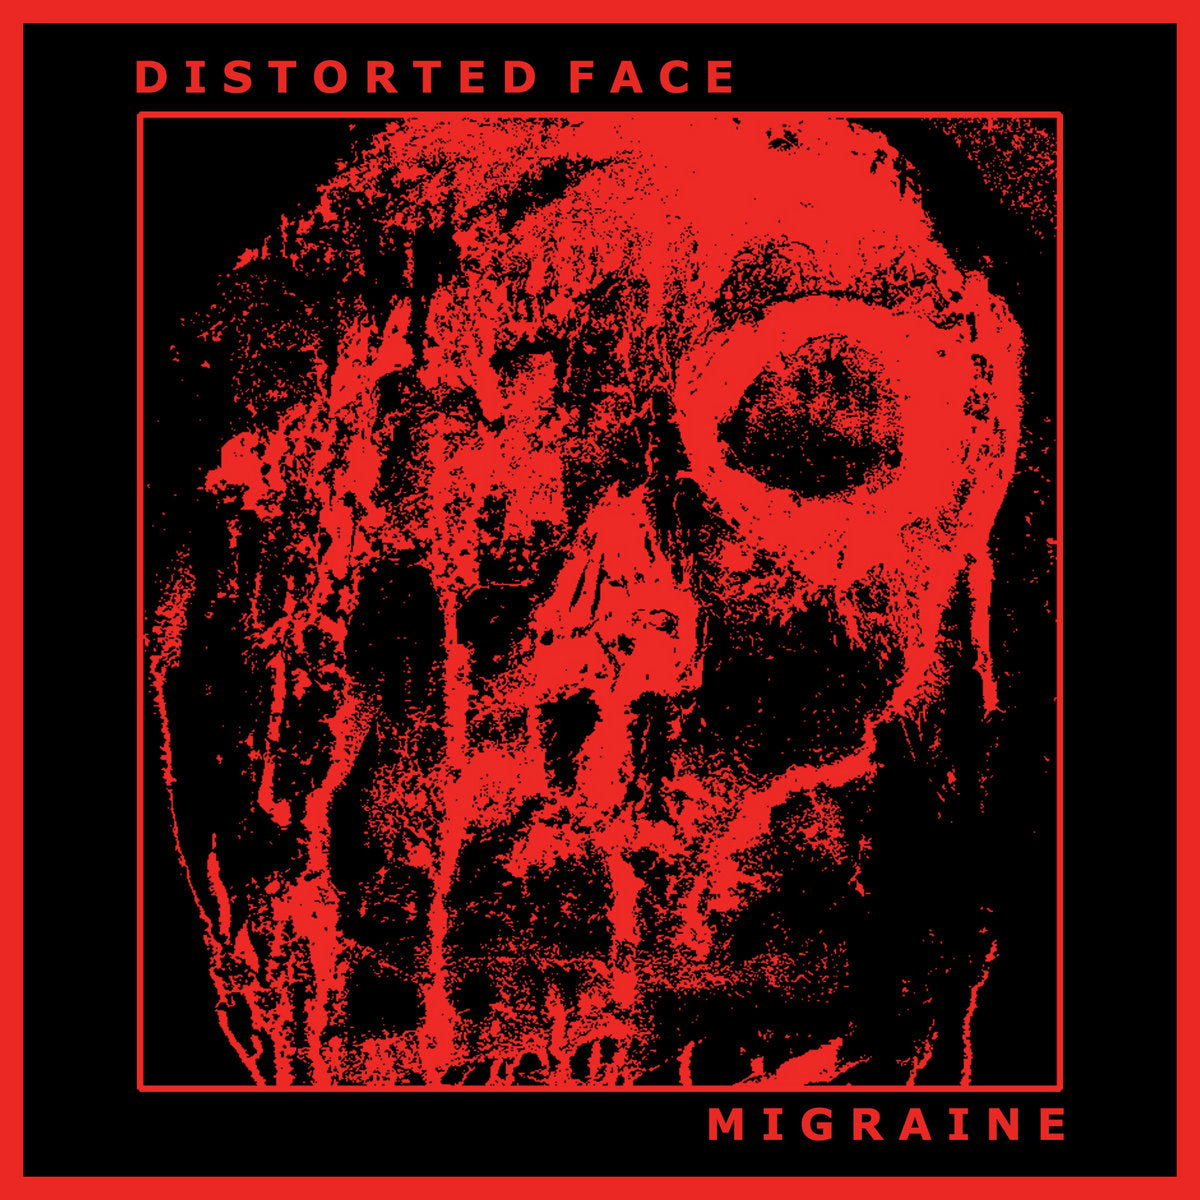 Distorted Face - Migraine 7" (Black Cover variant)